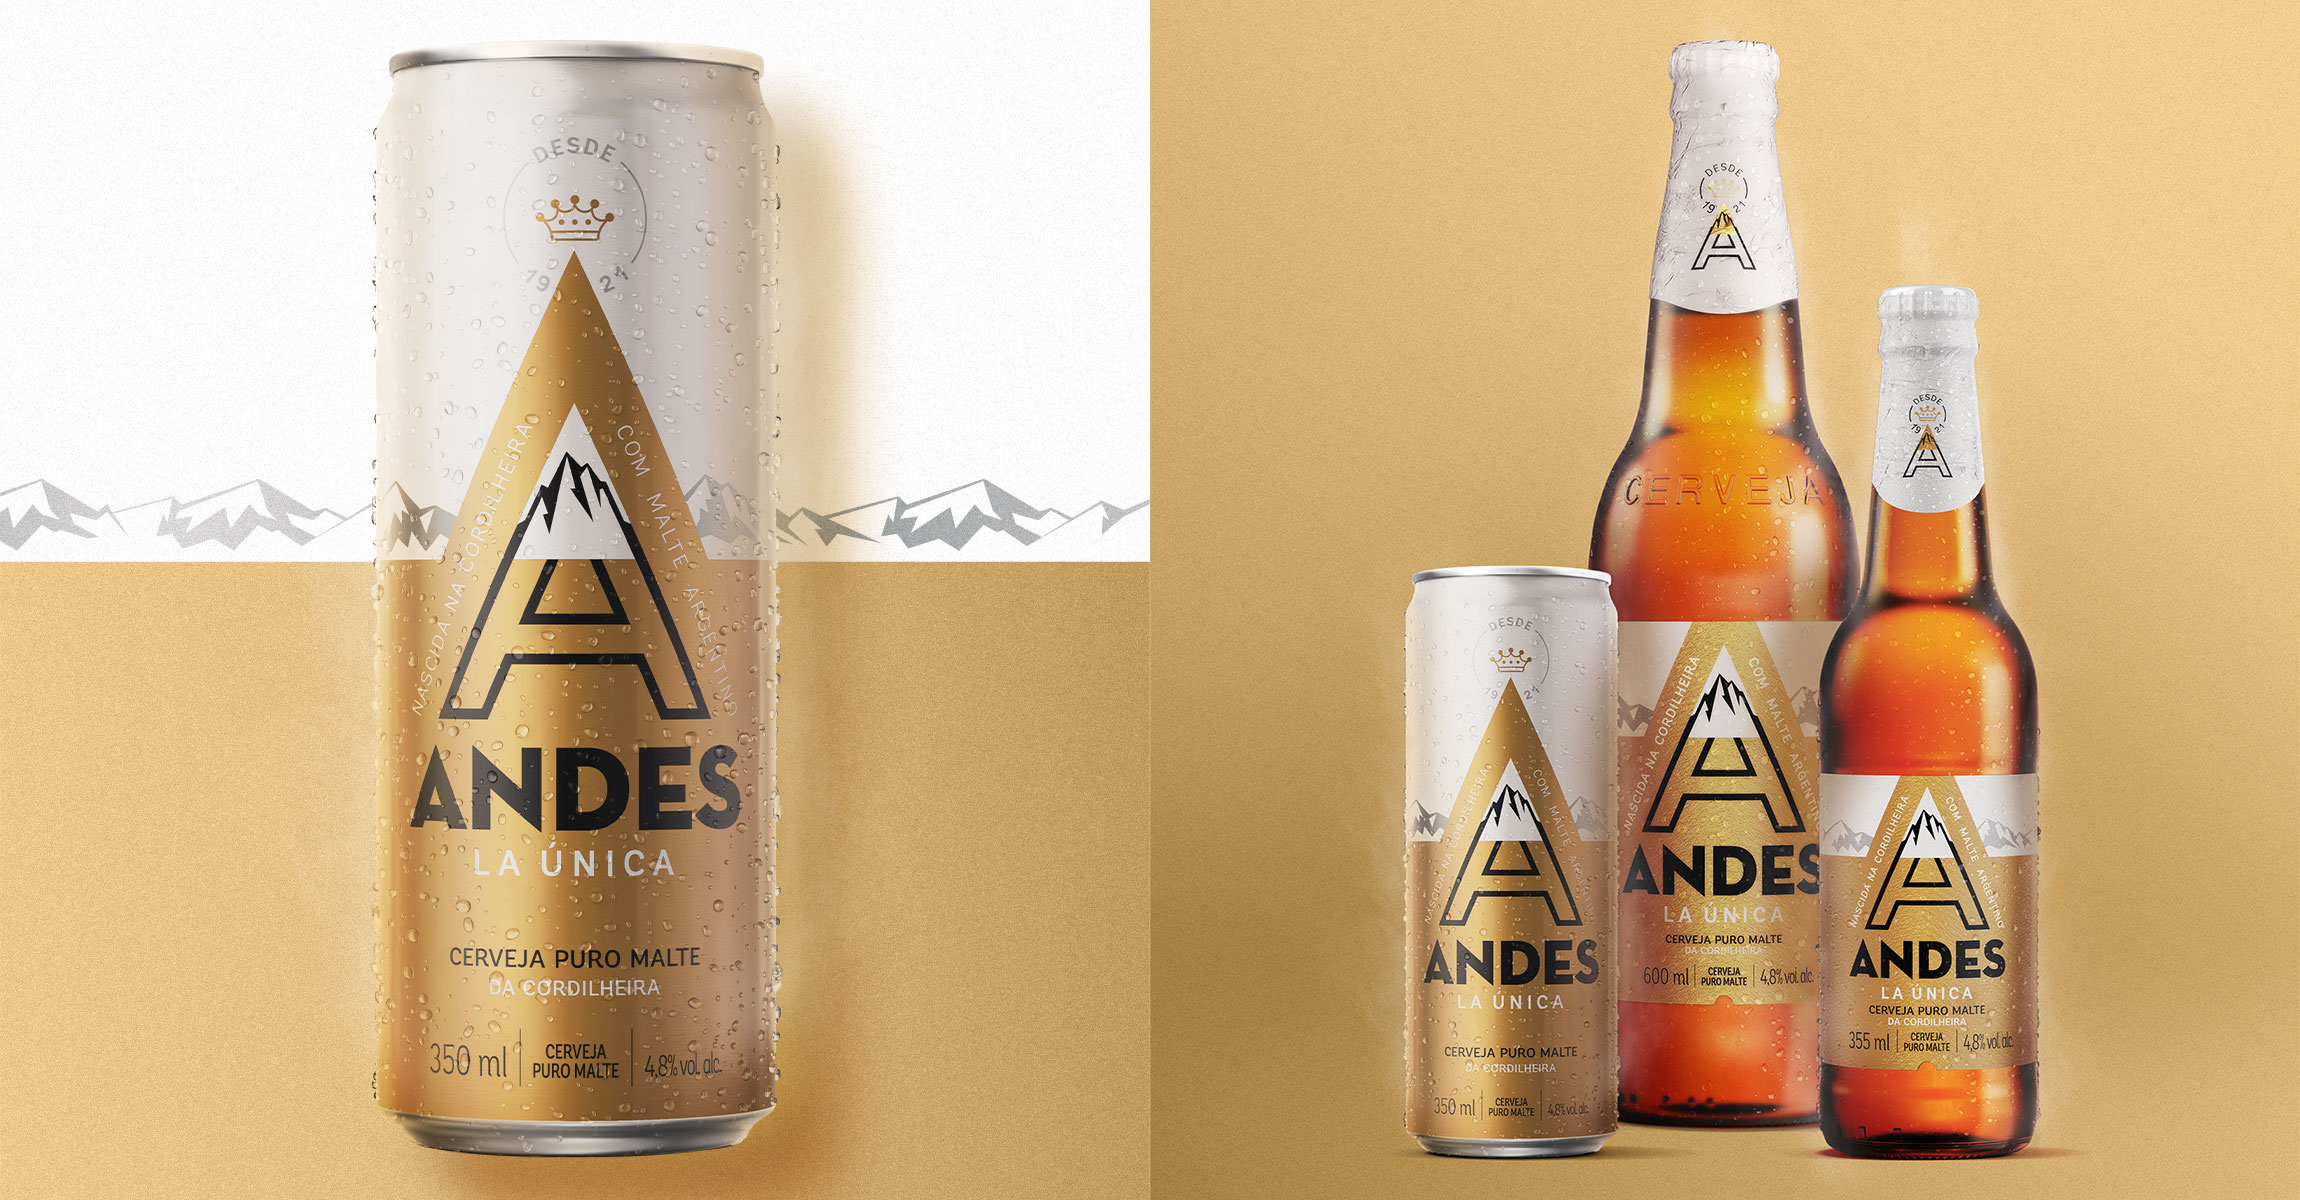 There’s Nothing Quite Like An Andes Beer